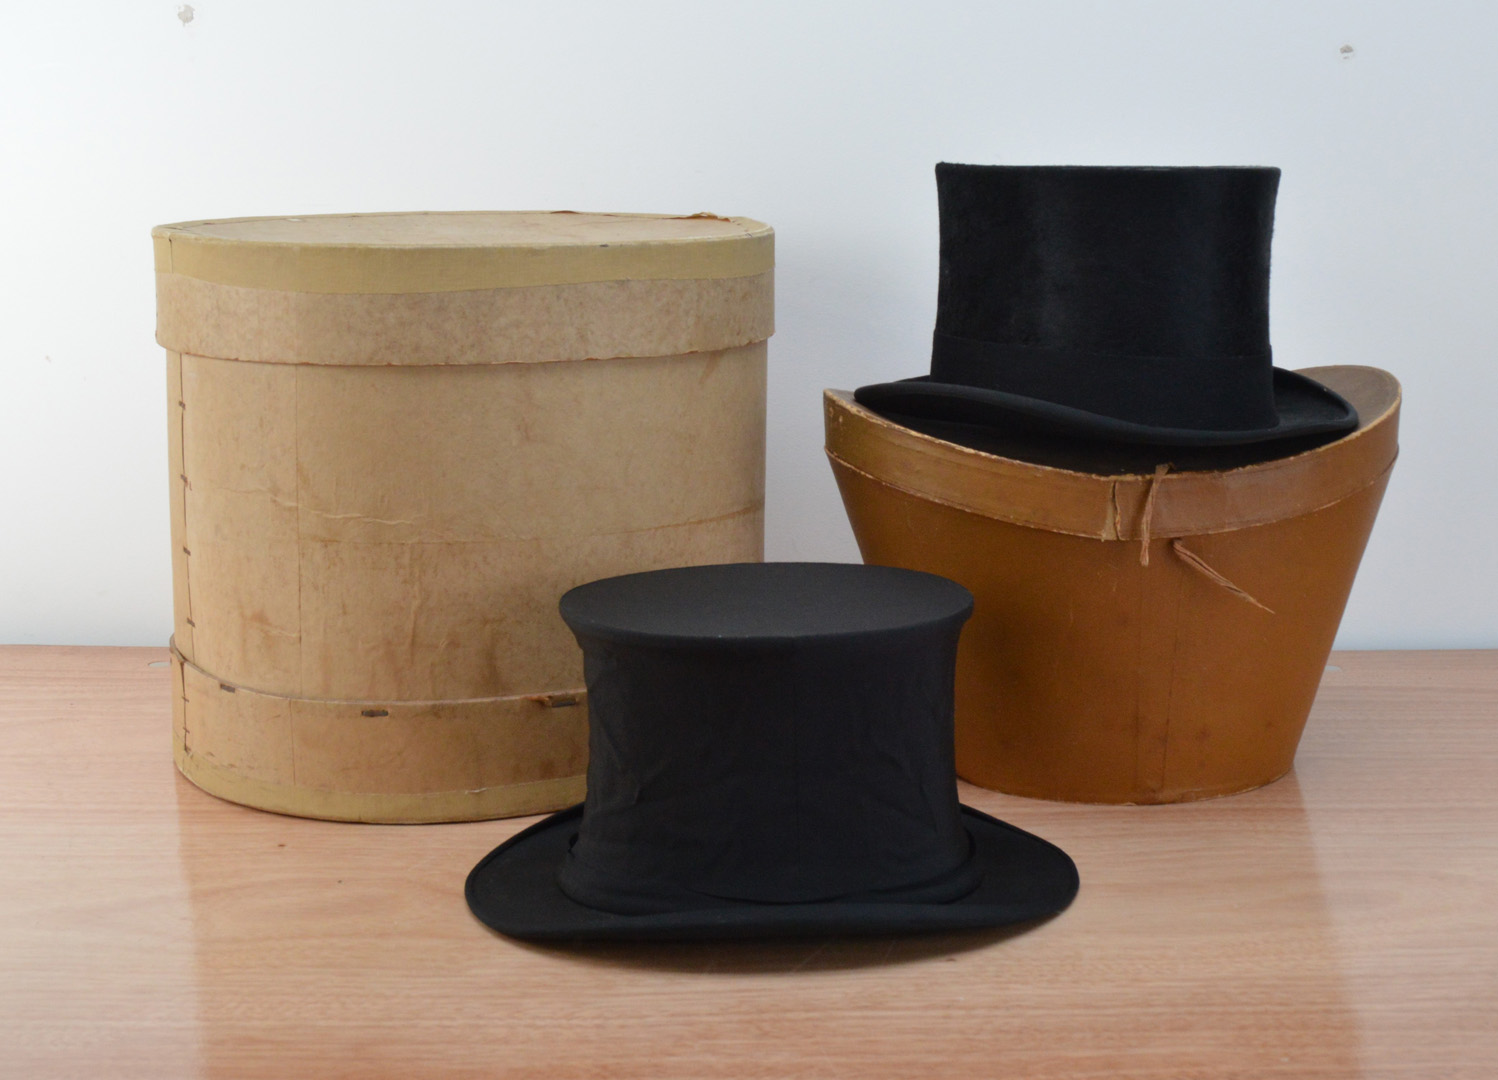 A Boxed silk top hat by W.J. Scotty Co. Ltd., together with a n Opera top hat by West & Co., all